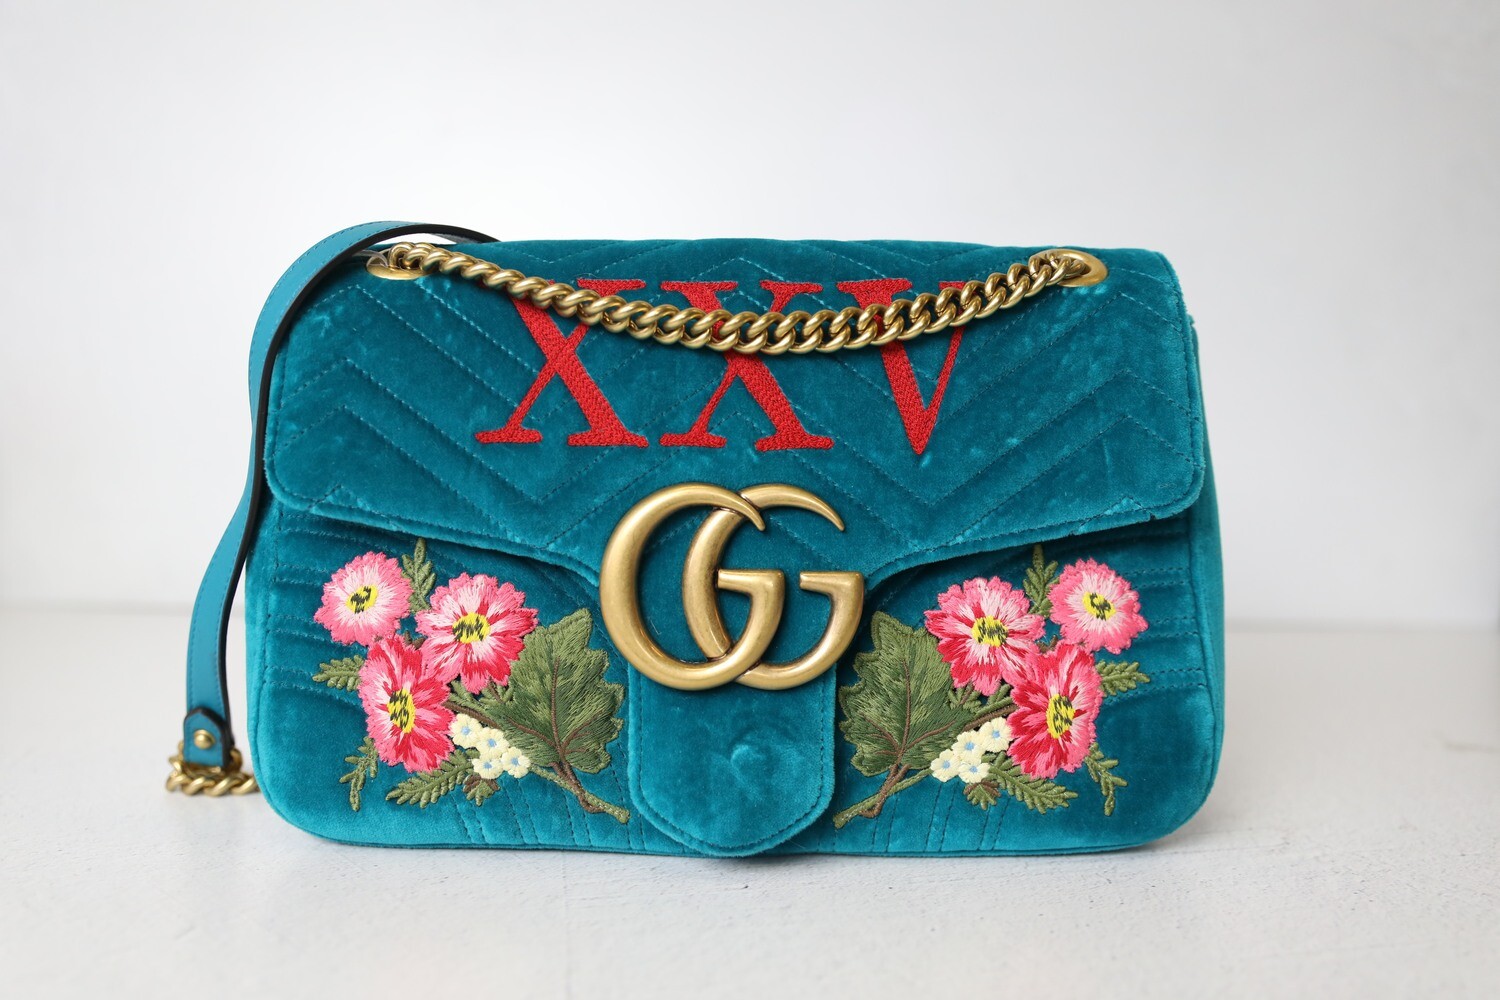 Gucci Marmont Medium, Blue Velvet with 25 and Floral Embroidery, Preowned  No Dustbag WA001 - Julia Rose Boston | Shop